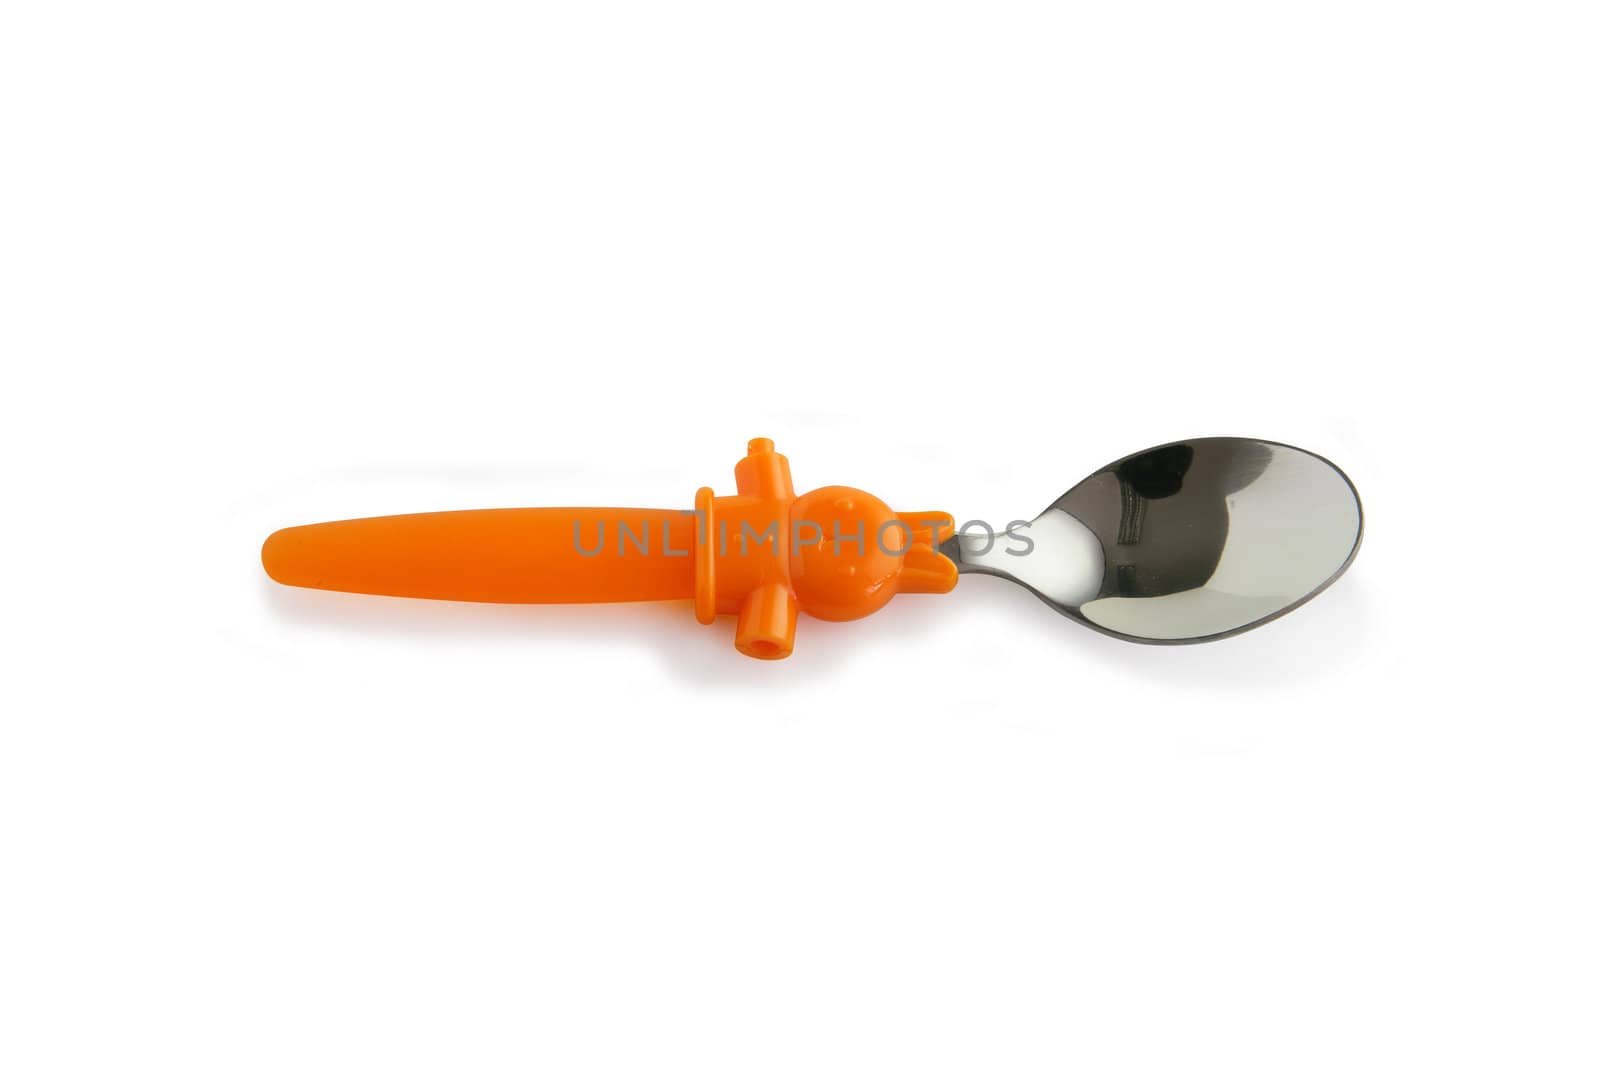 Silver spoon with orange plastic handle by phovoir